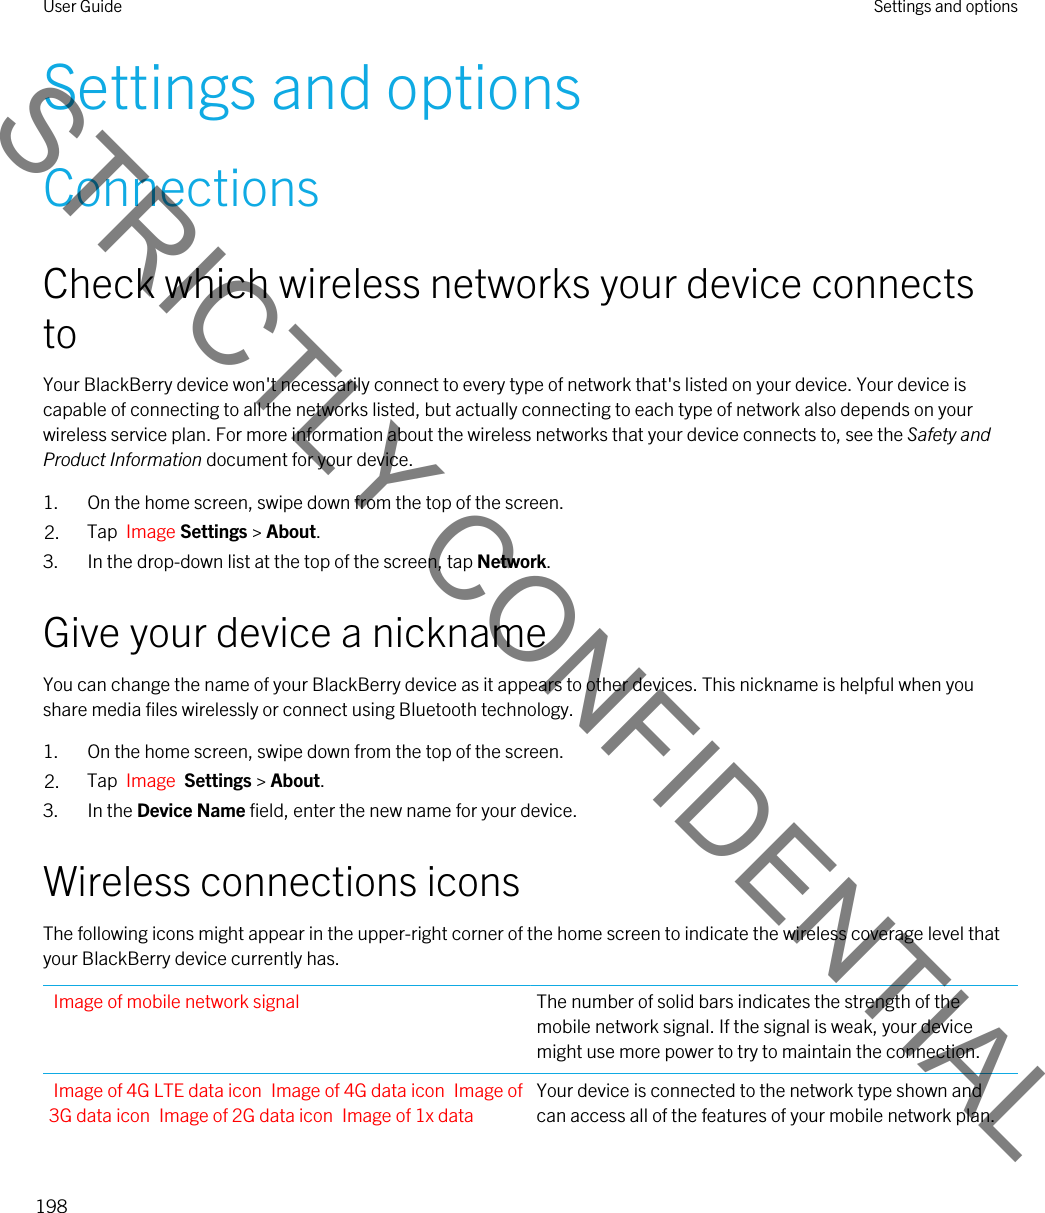 Settings and optionsConnectionsCheck which wireless networks your device connects toYour BlackBerry device won&apos;t necessarily connect to every type of network that&apos;s listed on your device. Your device is capable of connecting to all the networks listed, but actually connecting to each type of network also depends on your wireless service plan. For more information about the wireless networks that your device connects to, see the Safety and Product Information document for your device.1. On the home screen, swipe down from the top of the screen.2. Tap  Image Settings &gt; About.3. In the drop-down list at the top of the screen, tap Network.Give your device a nicknameYou can change the name of your BlackBerry device as it appears to other devices. This nickname is helpful when you share media files wirelessly or connect using Bluetooth technology.1. On the home screen, swipe down from the top of the screen.2. Tap  Image  Settings &gt; About.3. In the Device Name field, enter the new name for your device.Wireless connections iconsThe following icons might appear in the upper-right corner of the home screen to indicate the wireless coverage level that your BlackBerry device currently has.Image of mobile network signal The number of solid bars indicates the strength of the mobile network signal. If the signal is weak, your device might use more power to try to maintain the connection.Image of 4G LTE data icon Image of 4G data icon Image of 3G data icon Image of 2G data icon Image of 1x data Your device is connected to the network type shown and can access all of the features of your mobile network plan.User Guide Settings and options198STRICTLY CONFIDENTIAL